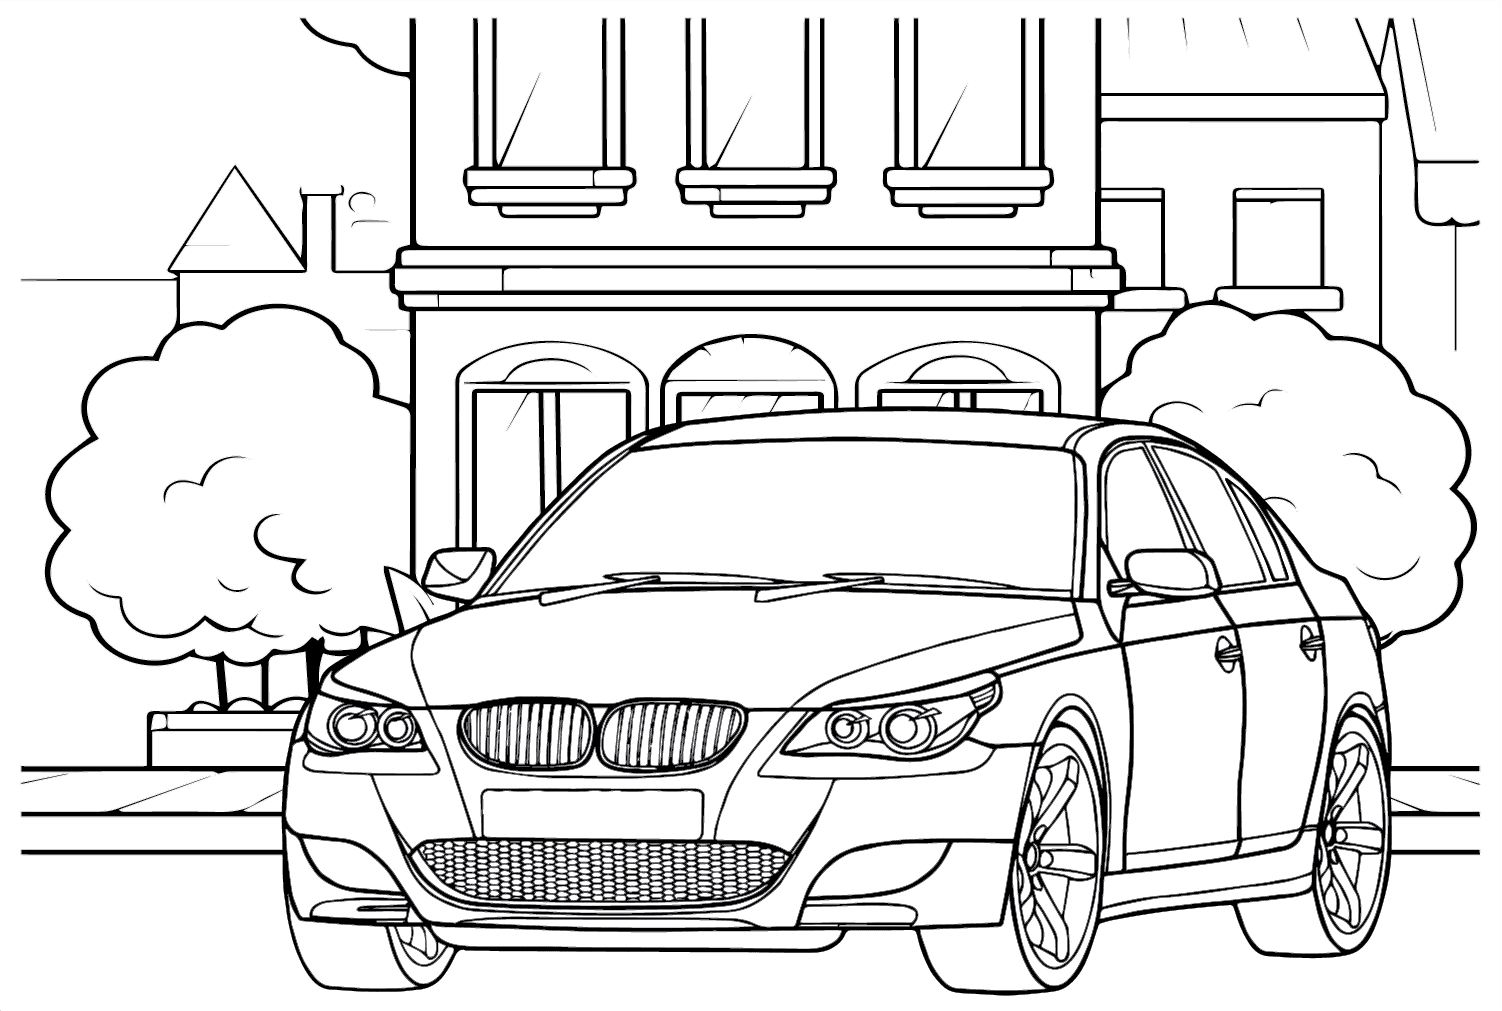 BMW M5 E60 Coloring Page - Free Printable Coloring Pages